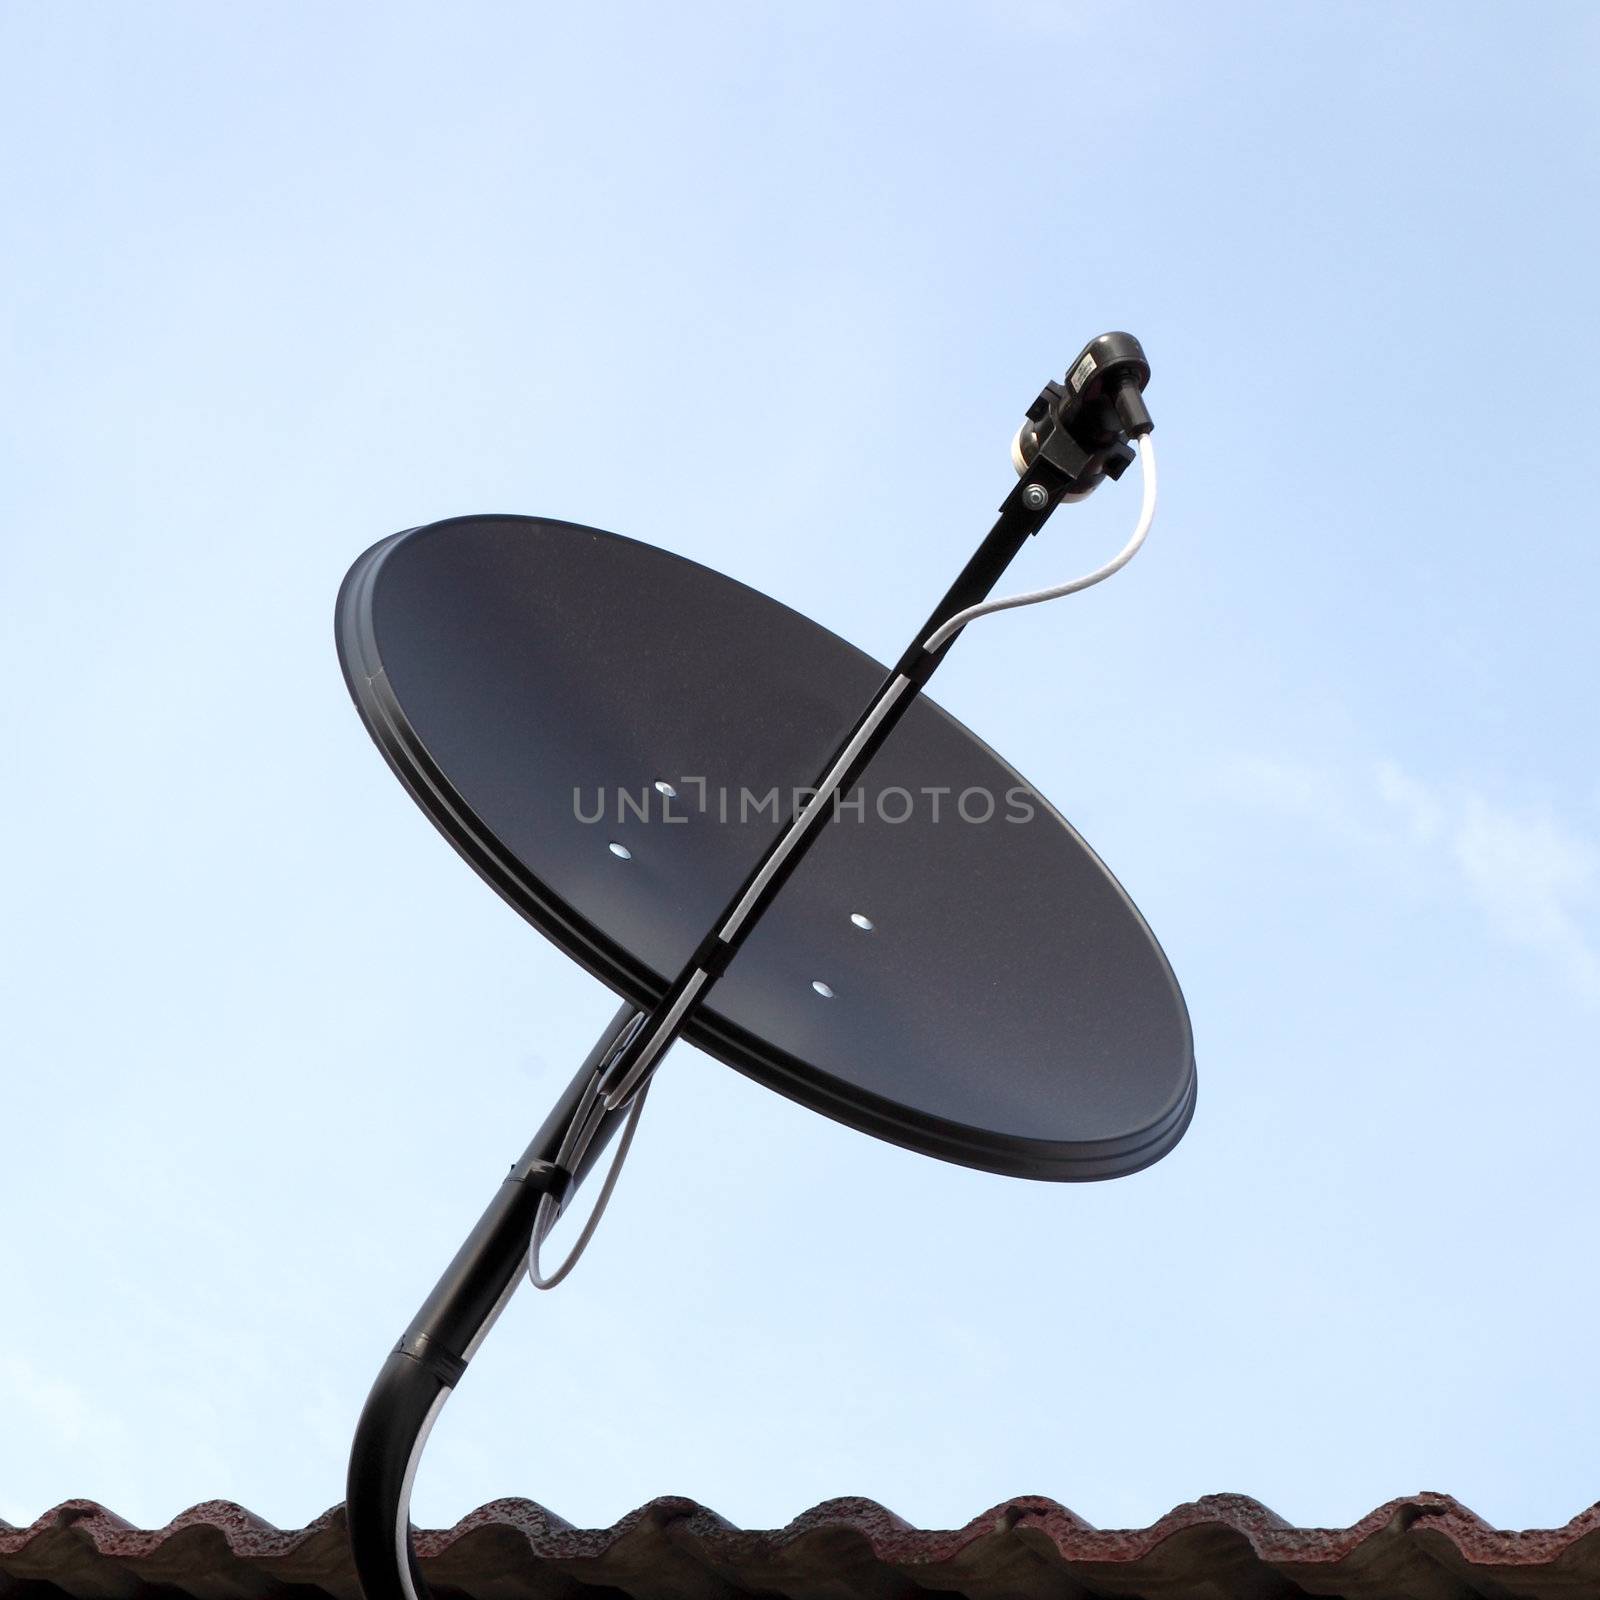 Satellite dish on the roof by geargodz